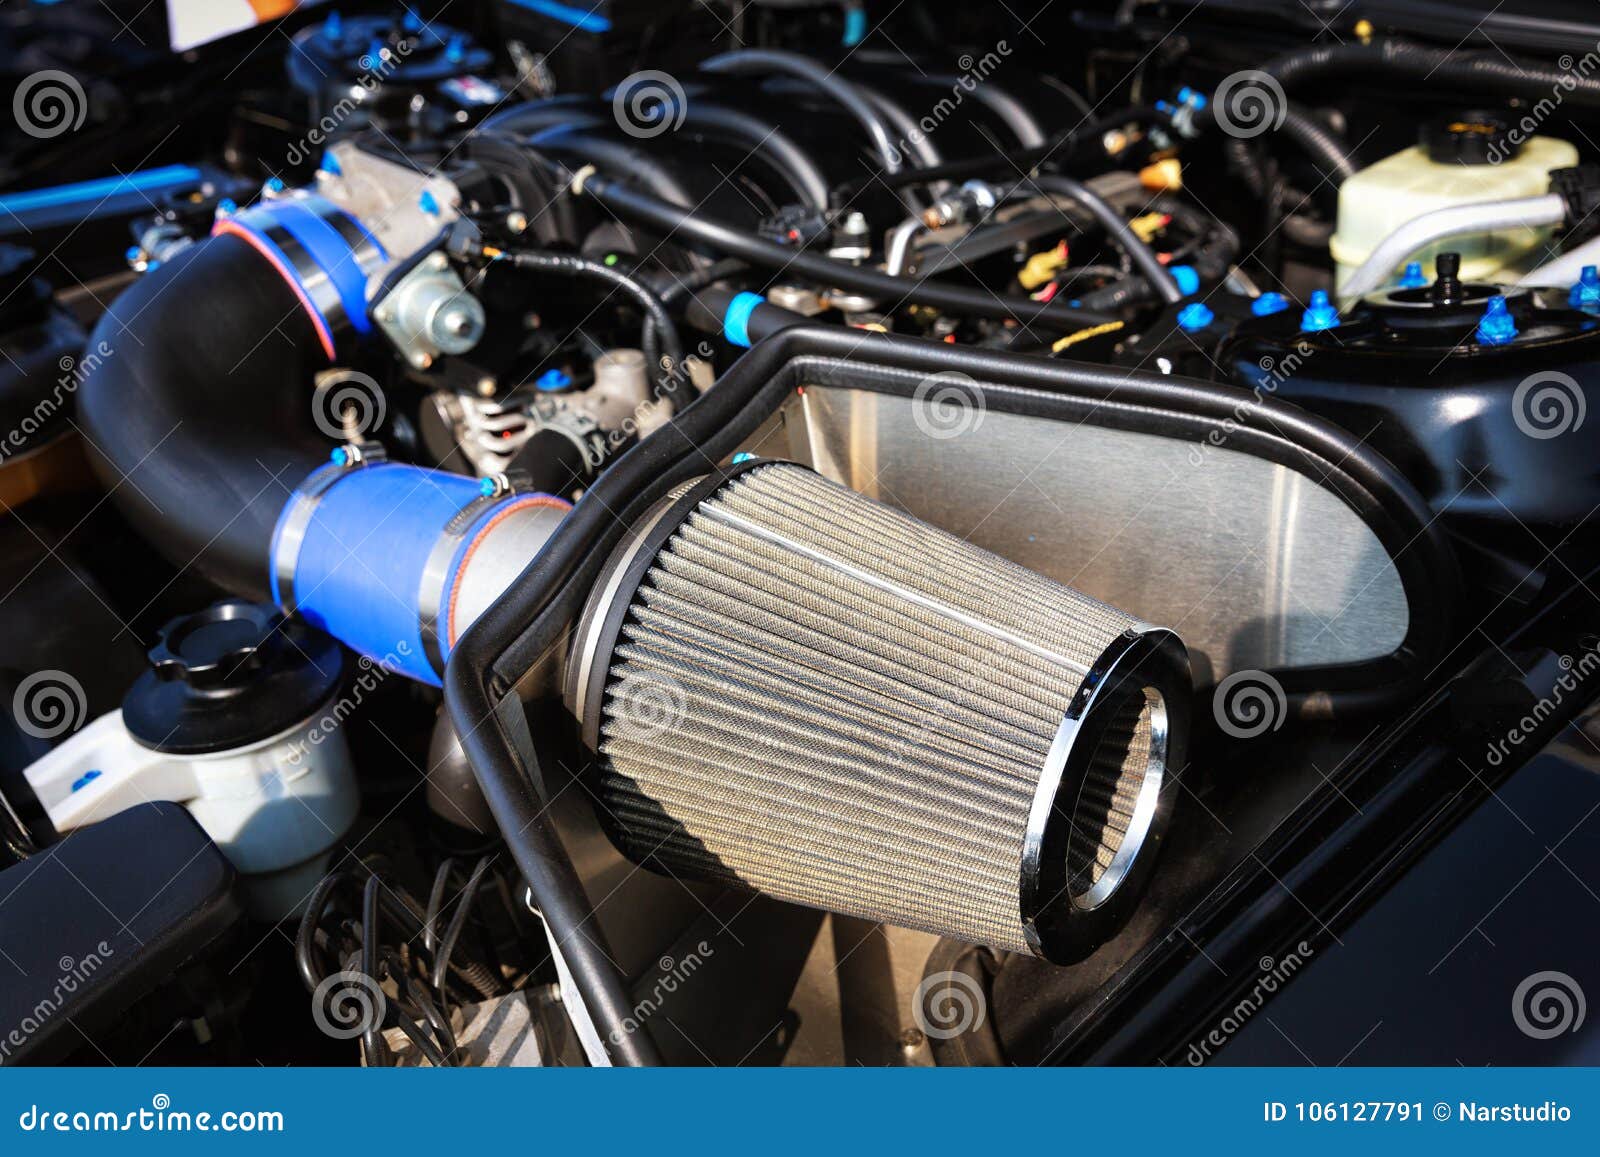 Sport car air filter. stock image. Image of shiny, sport - 106127791